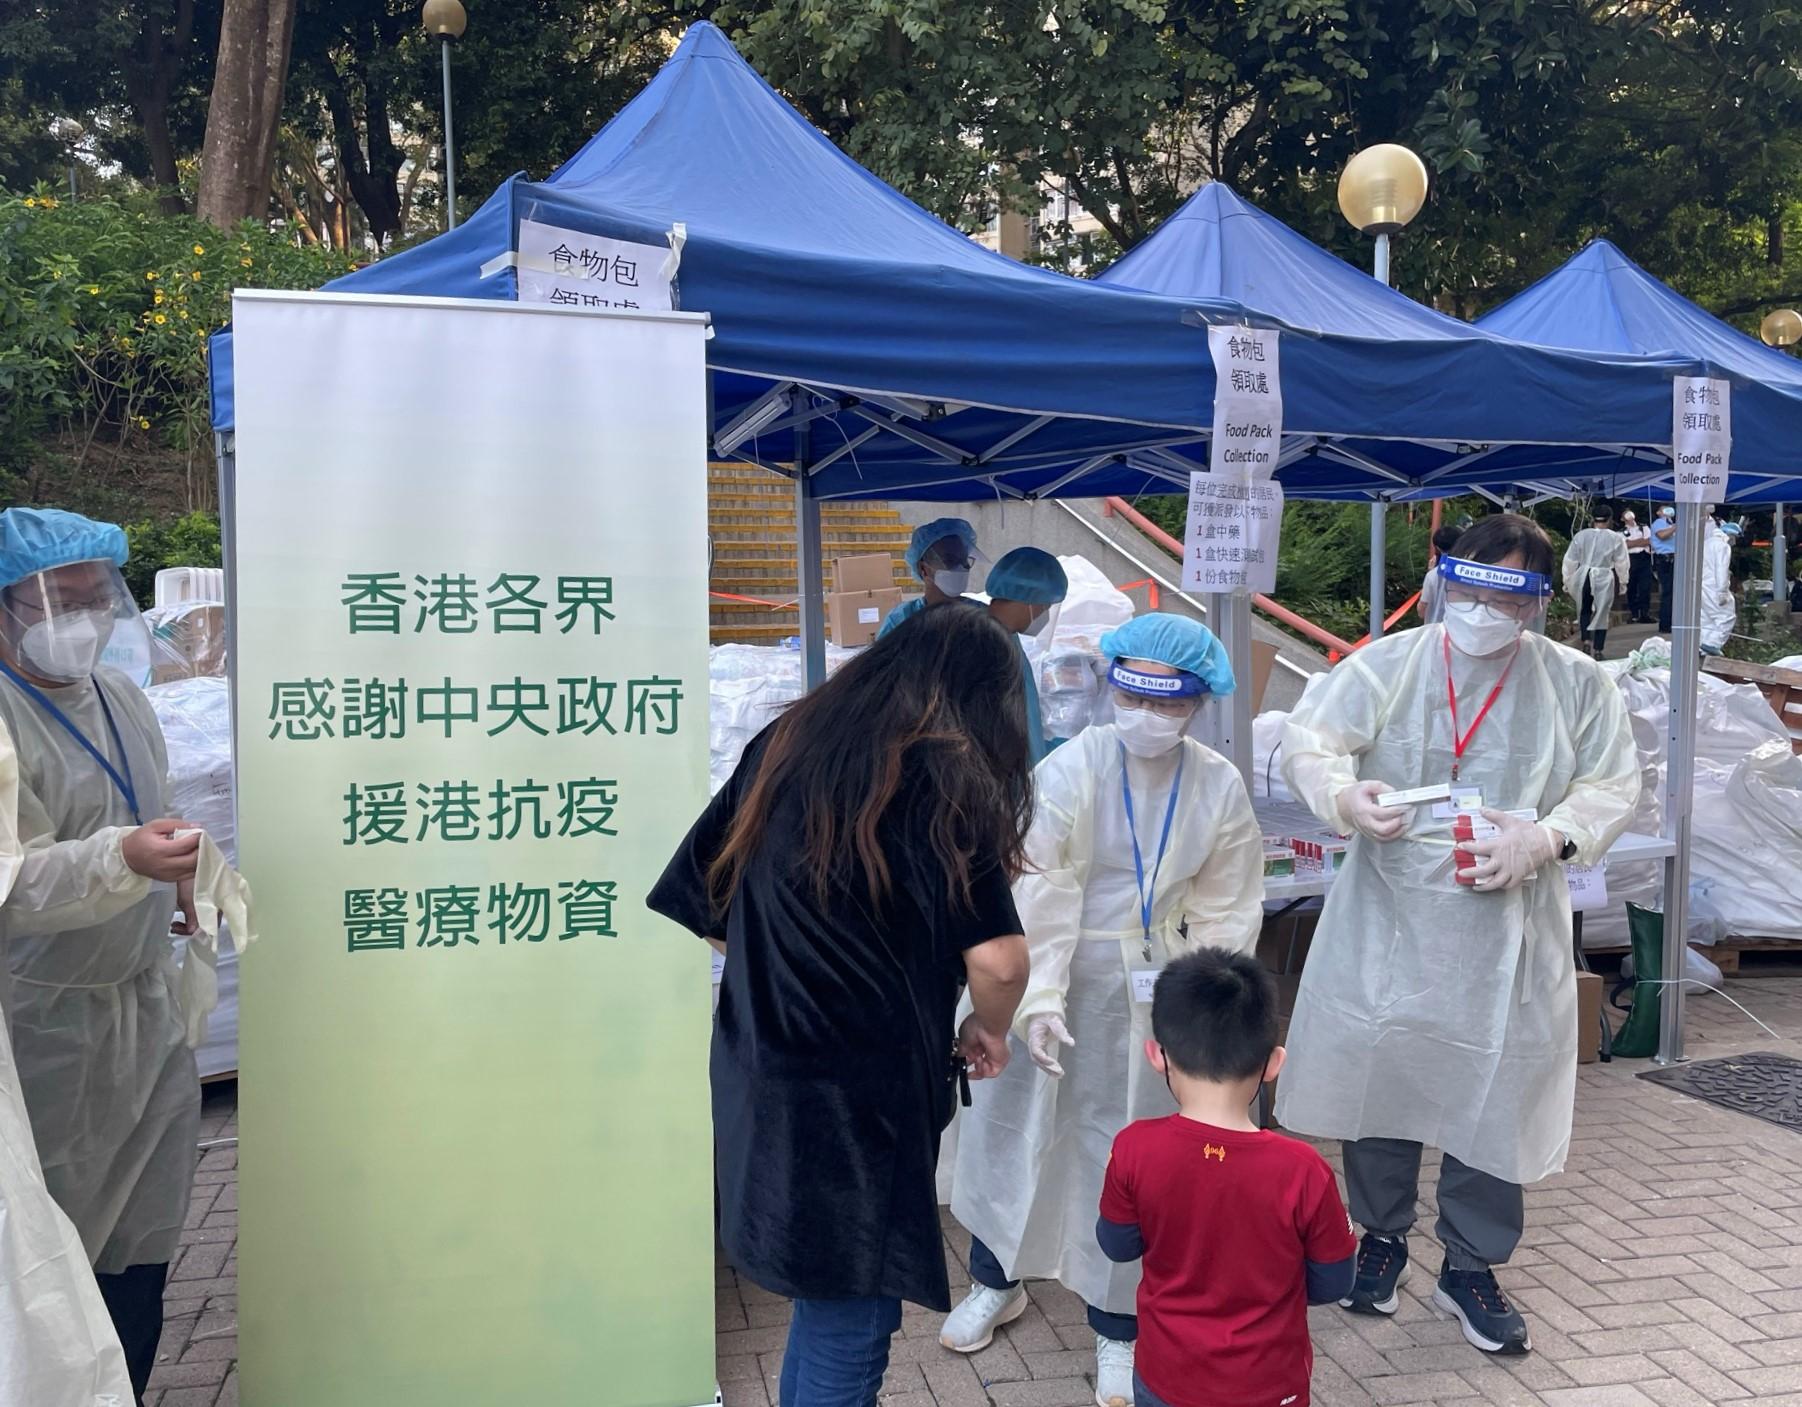 The Government yesterday (April 9) enforced "restriction-testing declaration" and compulsory testing notice in respect of specified "restricted area" in Hin Yau House, Hin Keng Estate, Sha Tin. Photo shows staff members of the Agriculture, Fisheries and Conservation Department distributing food packs, rapid antigen test kits and anti-epidemic proprietary Chinese medicines supplied by the Central Government to residents subject to compulsory testing.